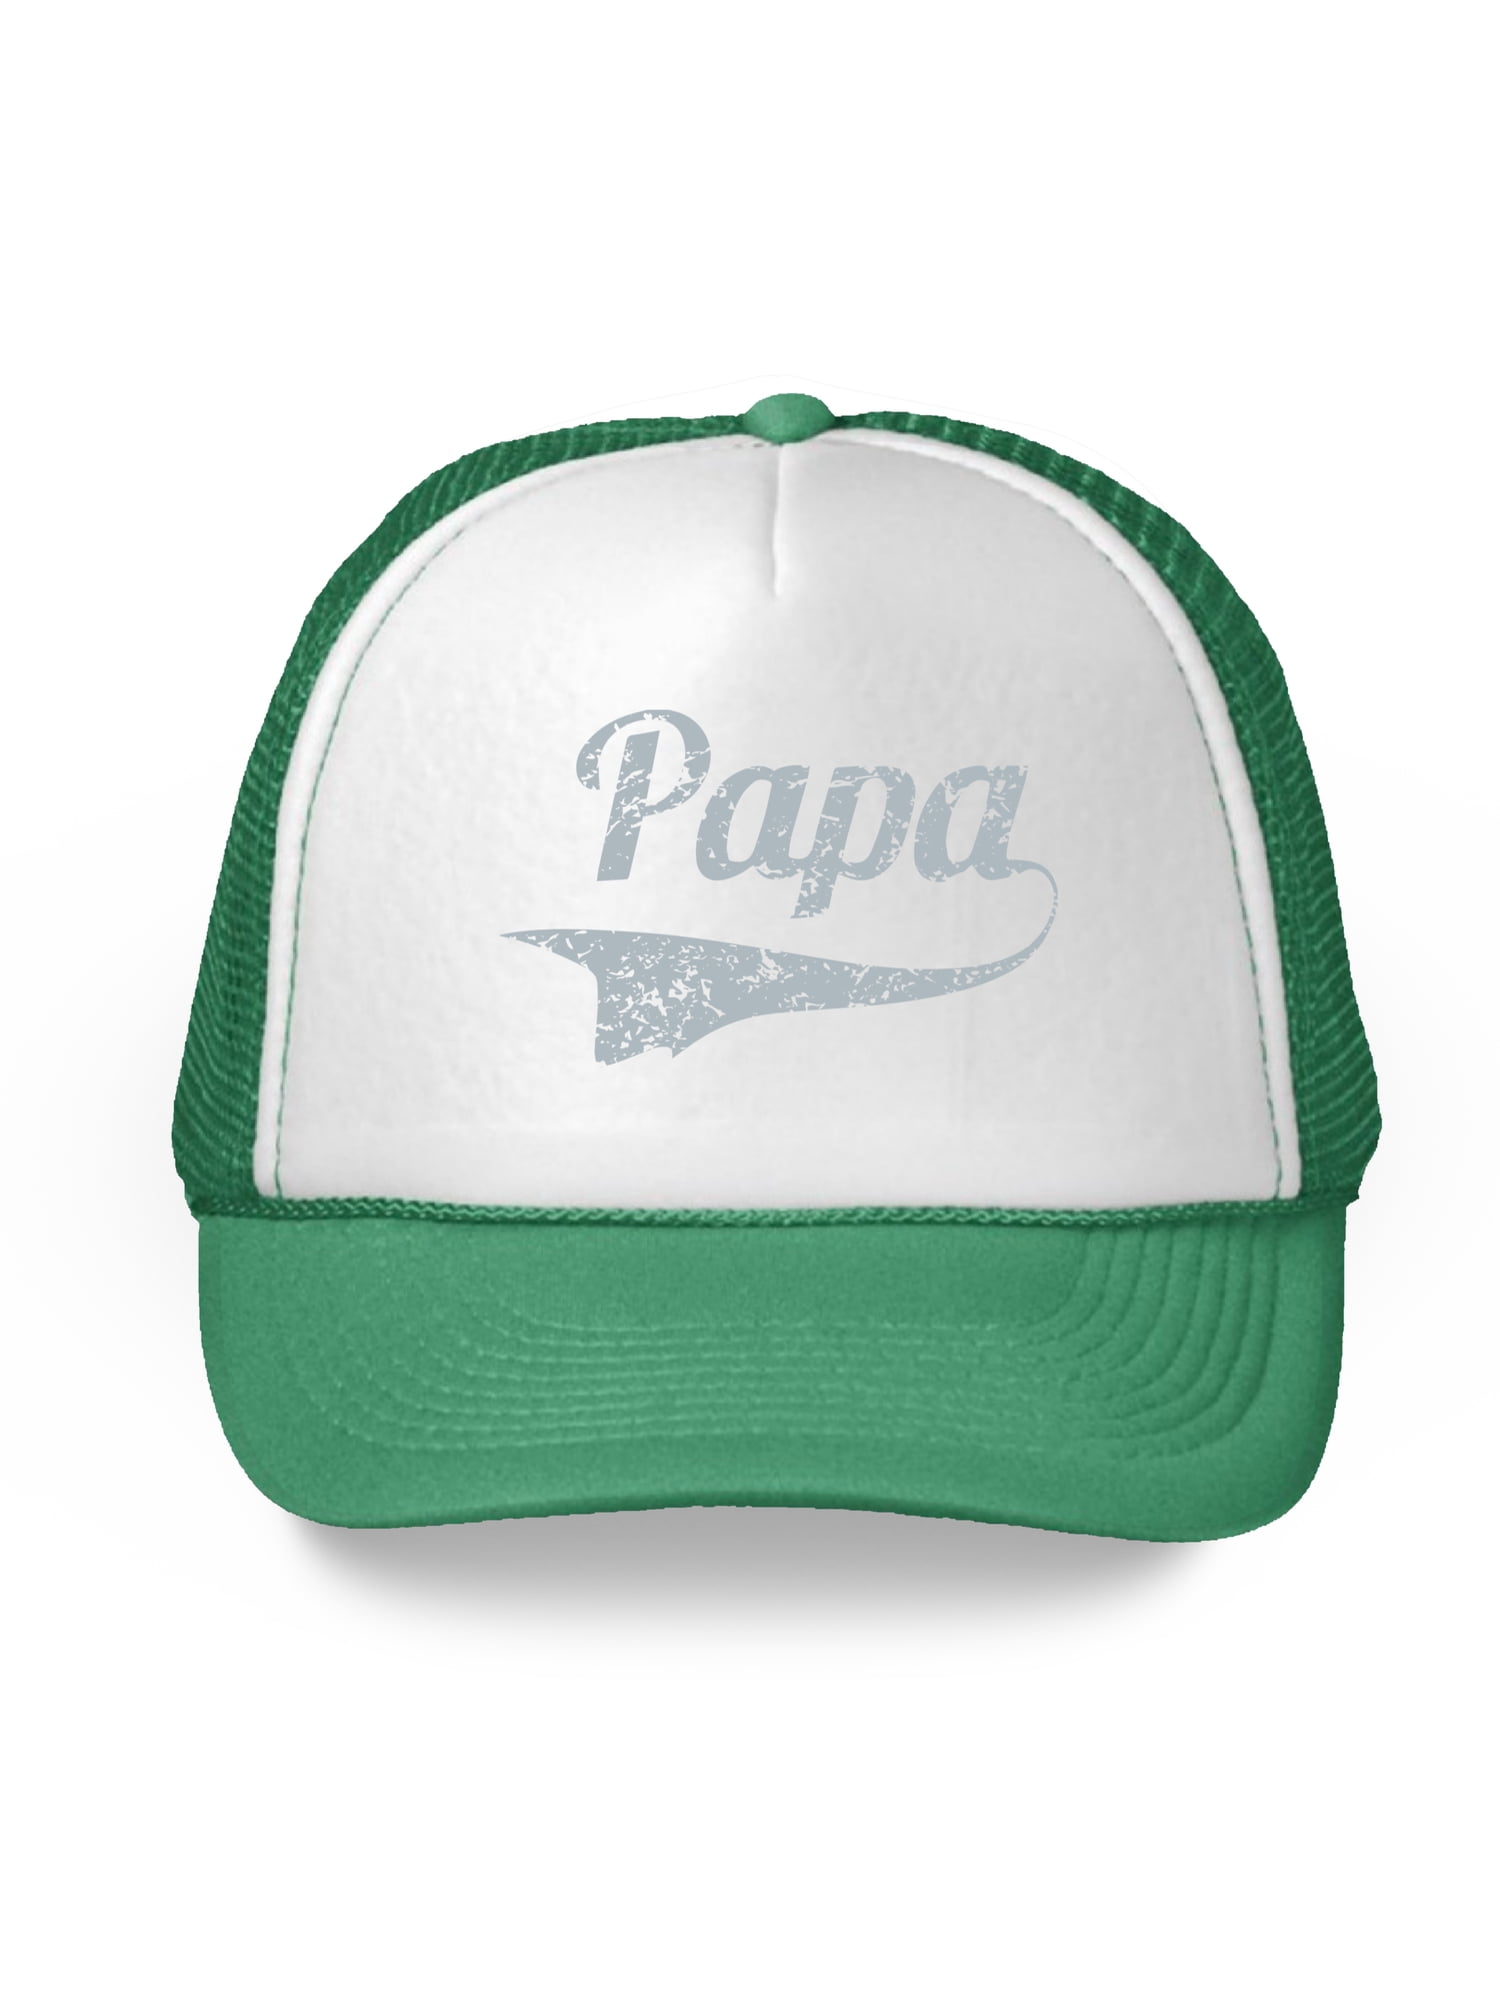 Awkward Styles Papa Trucker Hat Father's Day Gifts for Men Dad Hats Dad  2018 Trucker Hat Funny Gifts for Dad Hat Accessories for Men Father Trucker